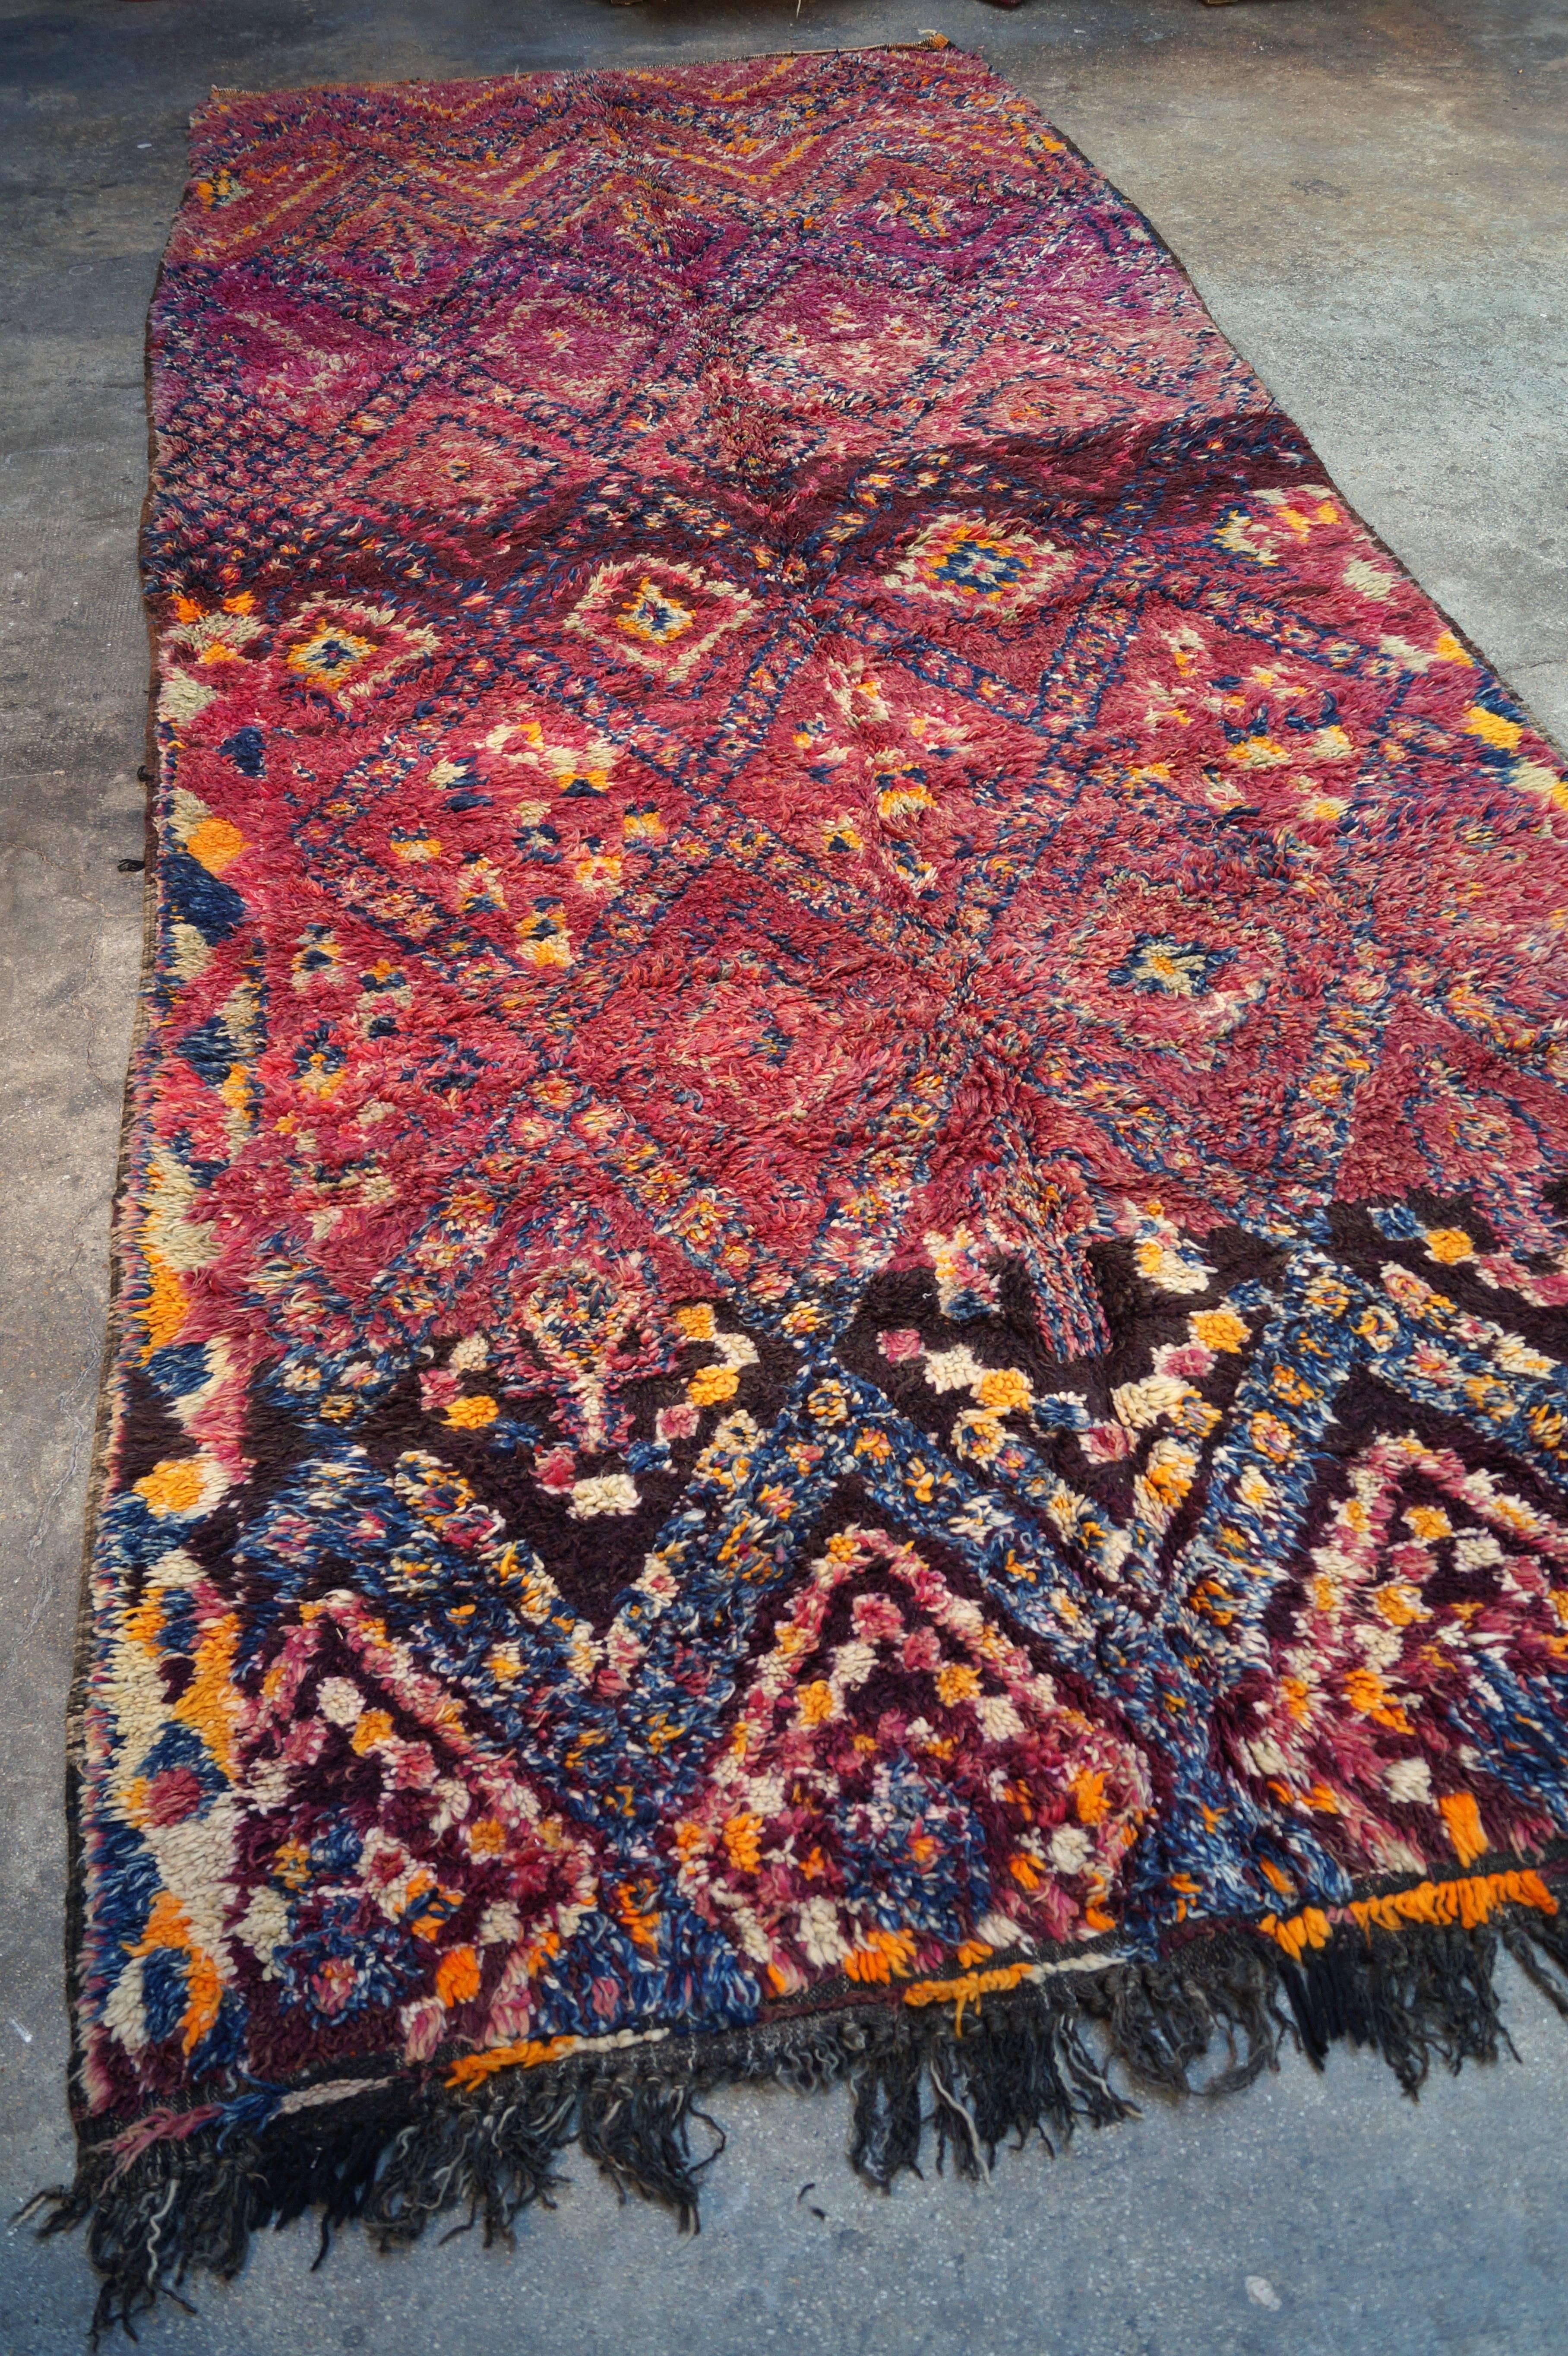 Vintage Moroccan rug 
Measures: 430 x 180 cm
Handmade in the Middle Atlas, Beni Mguild tribe
One of a kind, hand-knotted wool
1940s-1950s.